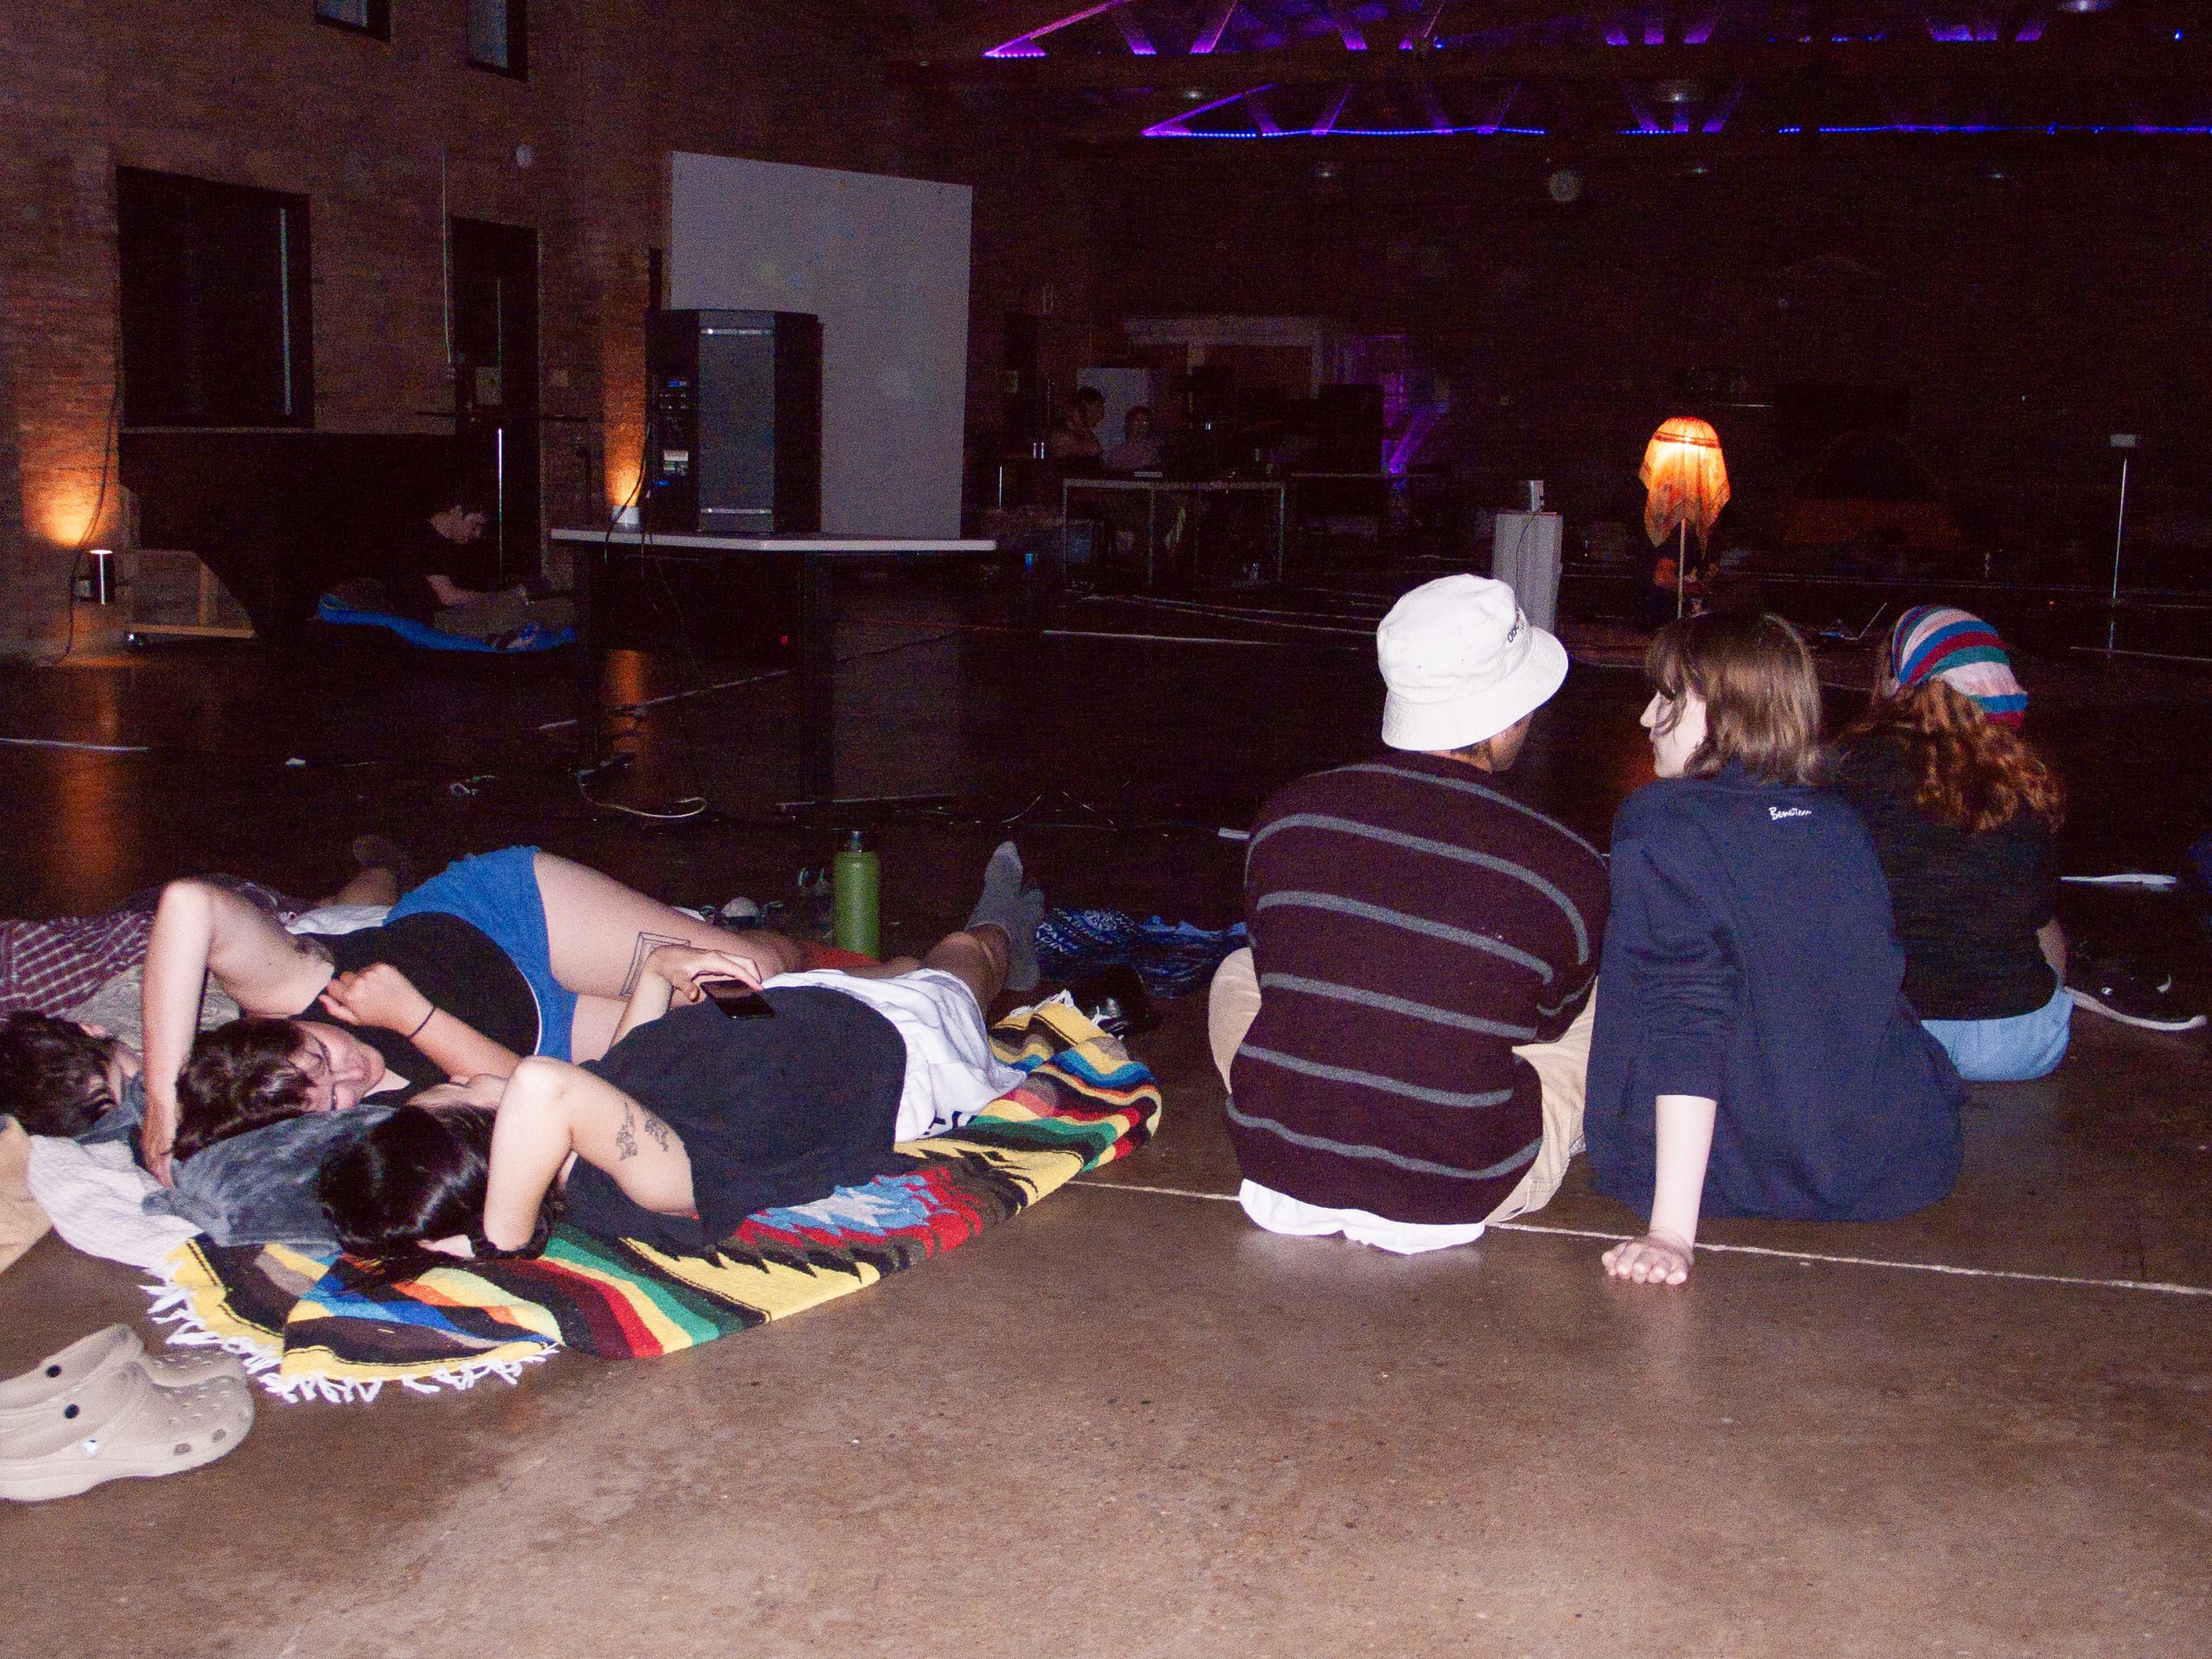 Image: Image: The crowd sitting and laying in a dark room on a polished concrete floor at StretchMetal's Drone Sleepover. They face away from the camera, and towards a stage with a large speaker, other sound equipment, and a floor lamp with a large, translucent sheet over it. Image courtesy of StretchMetal.